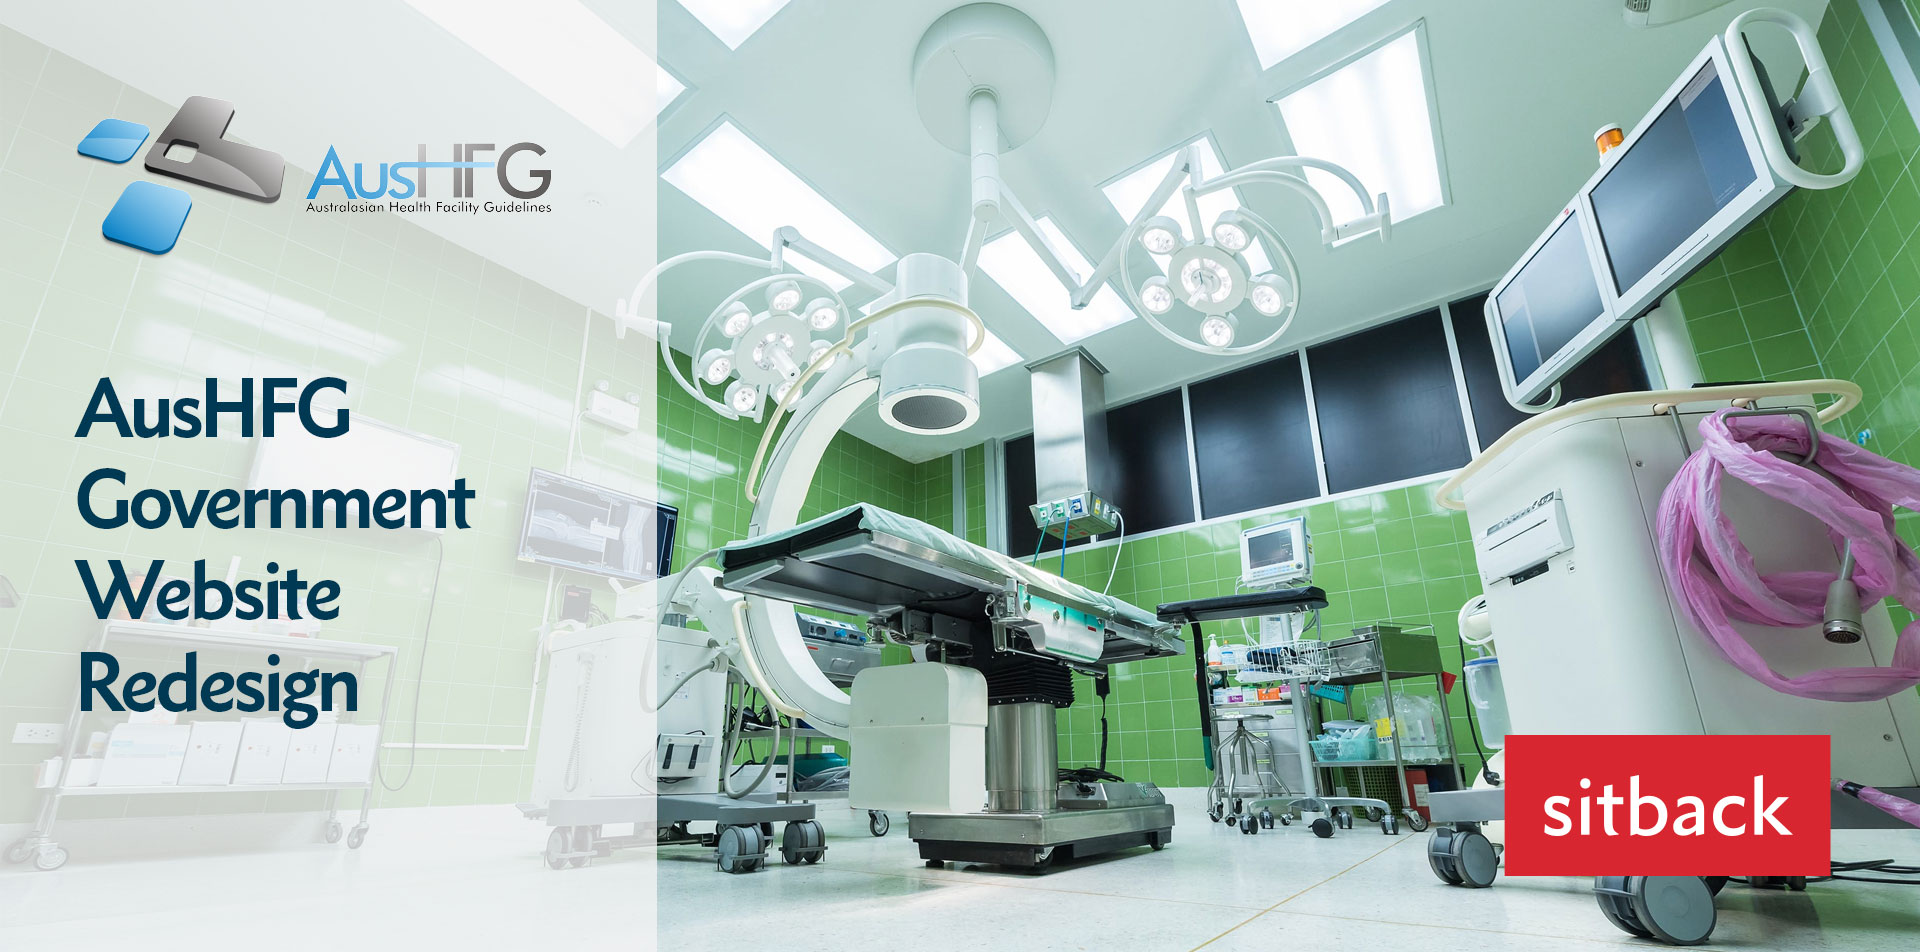 AusHFG government website redesign - Photo of the inside of an operating room in a hospital.